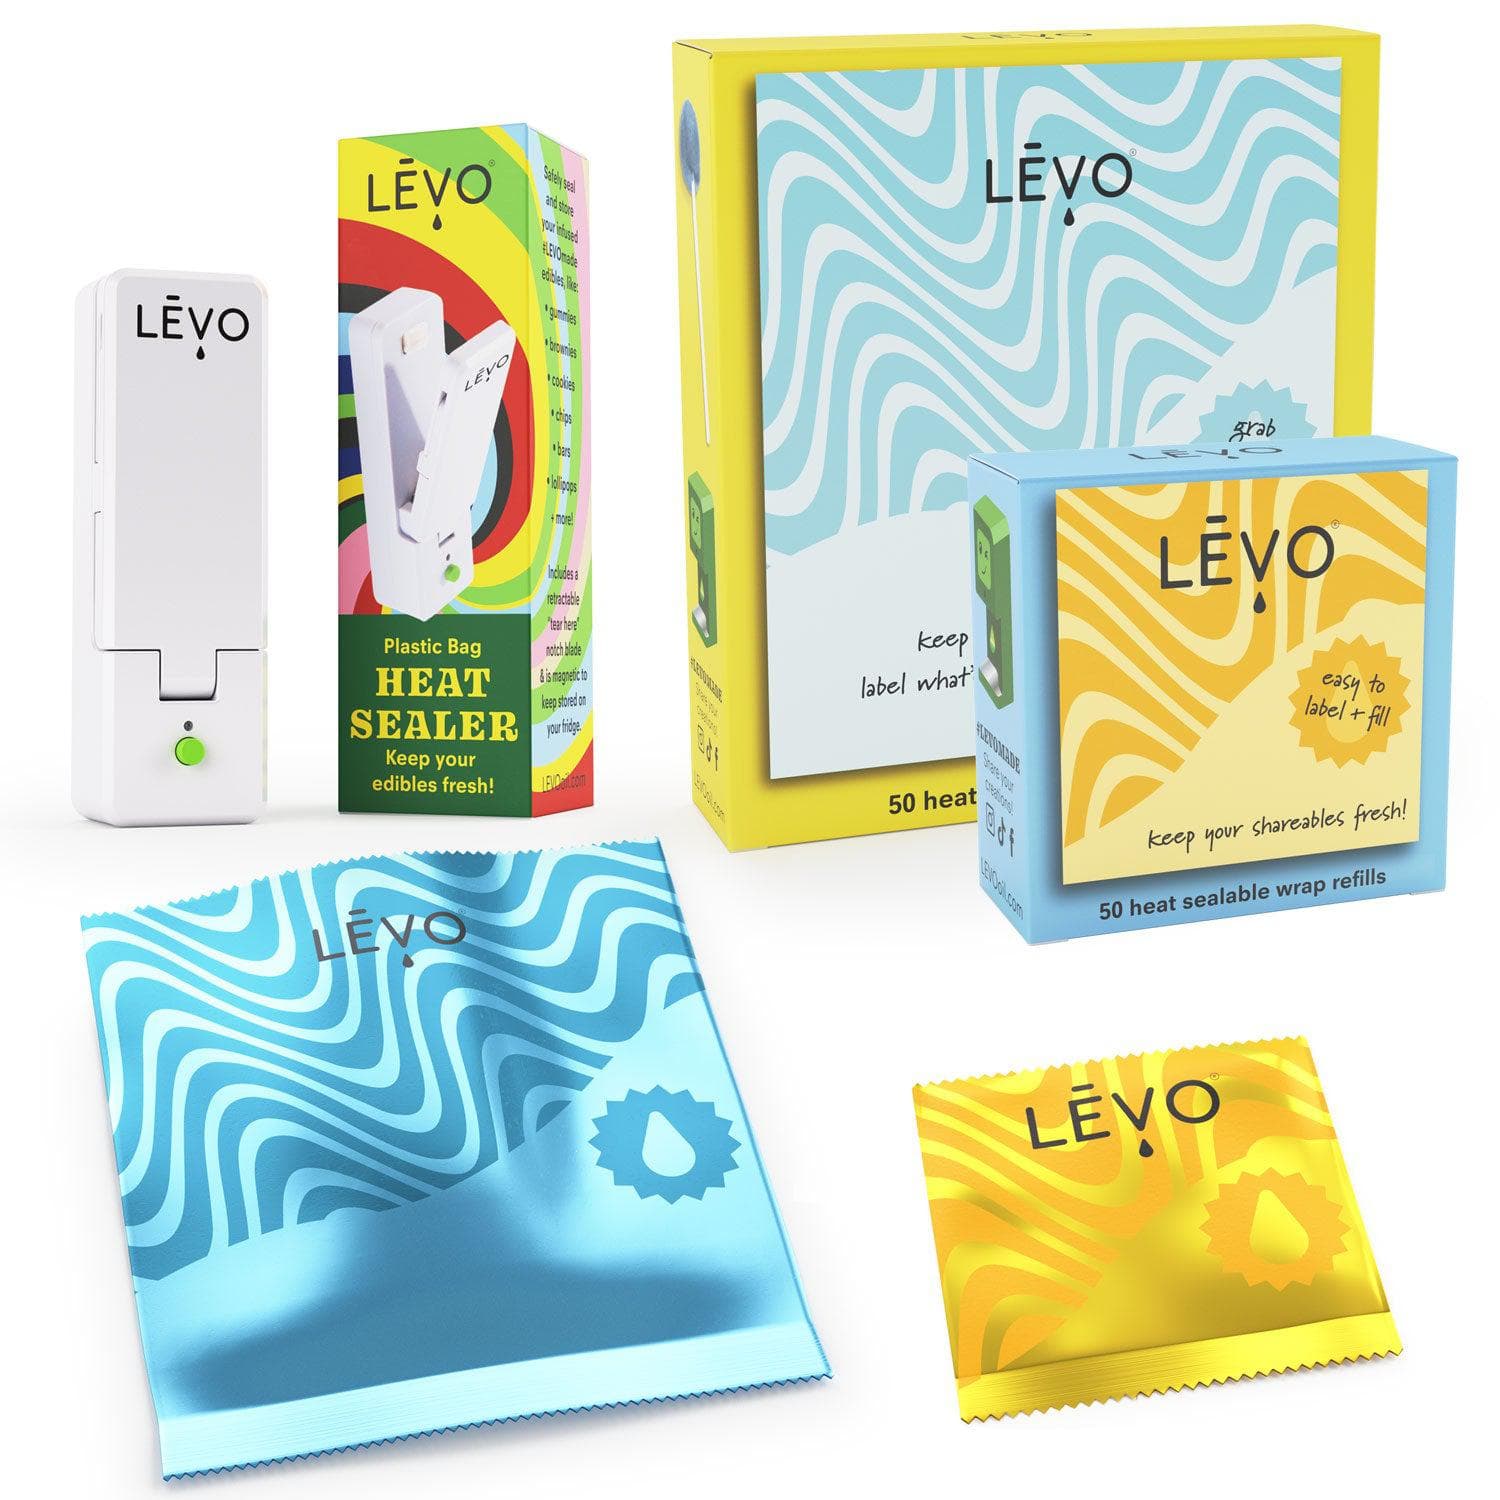 LEVO heat sealer kit, because sharing is caring! Use the sharing is caring kit to share #levomade edibles with your friends. 